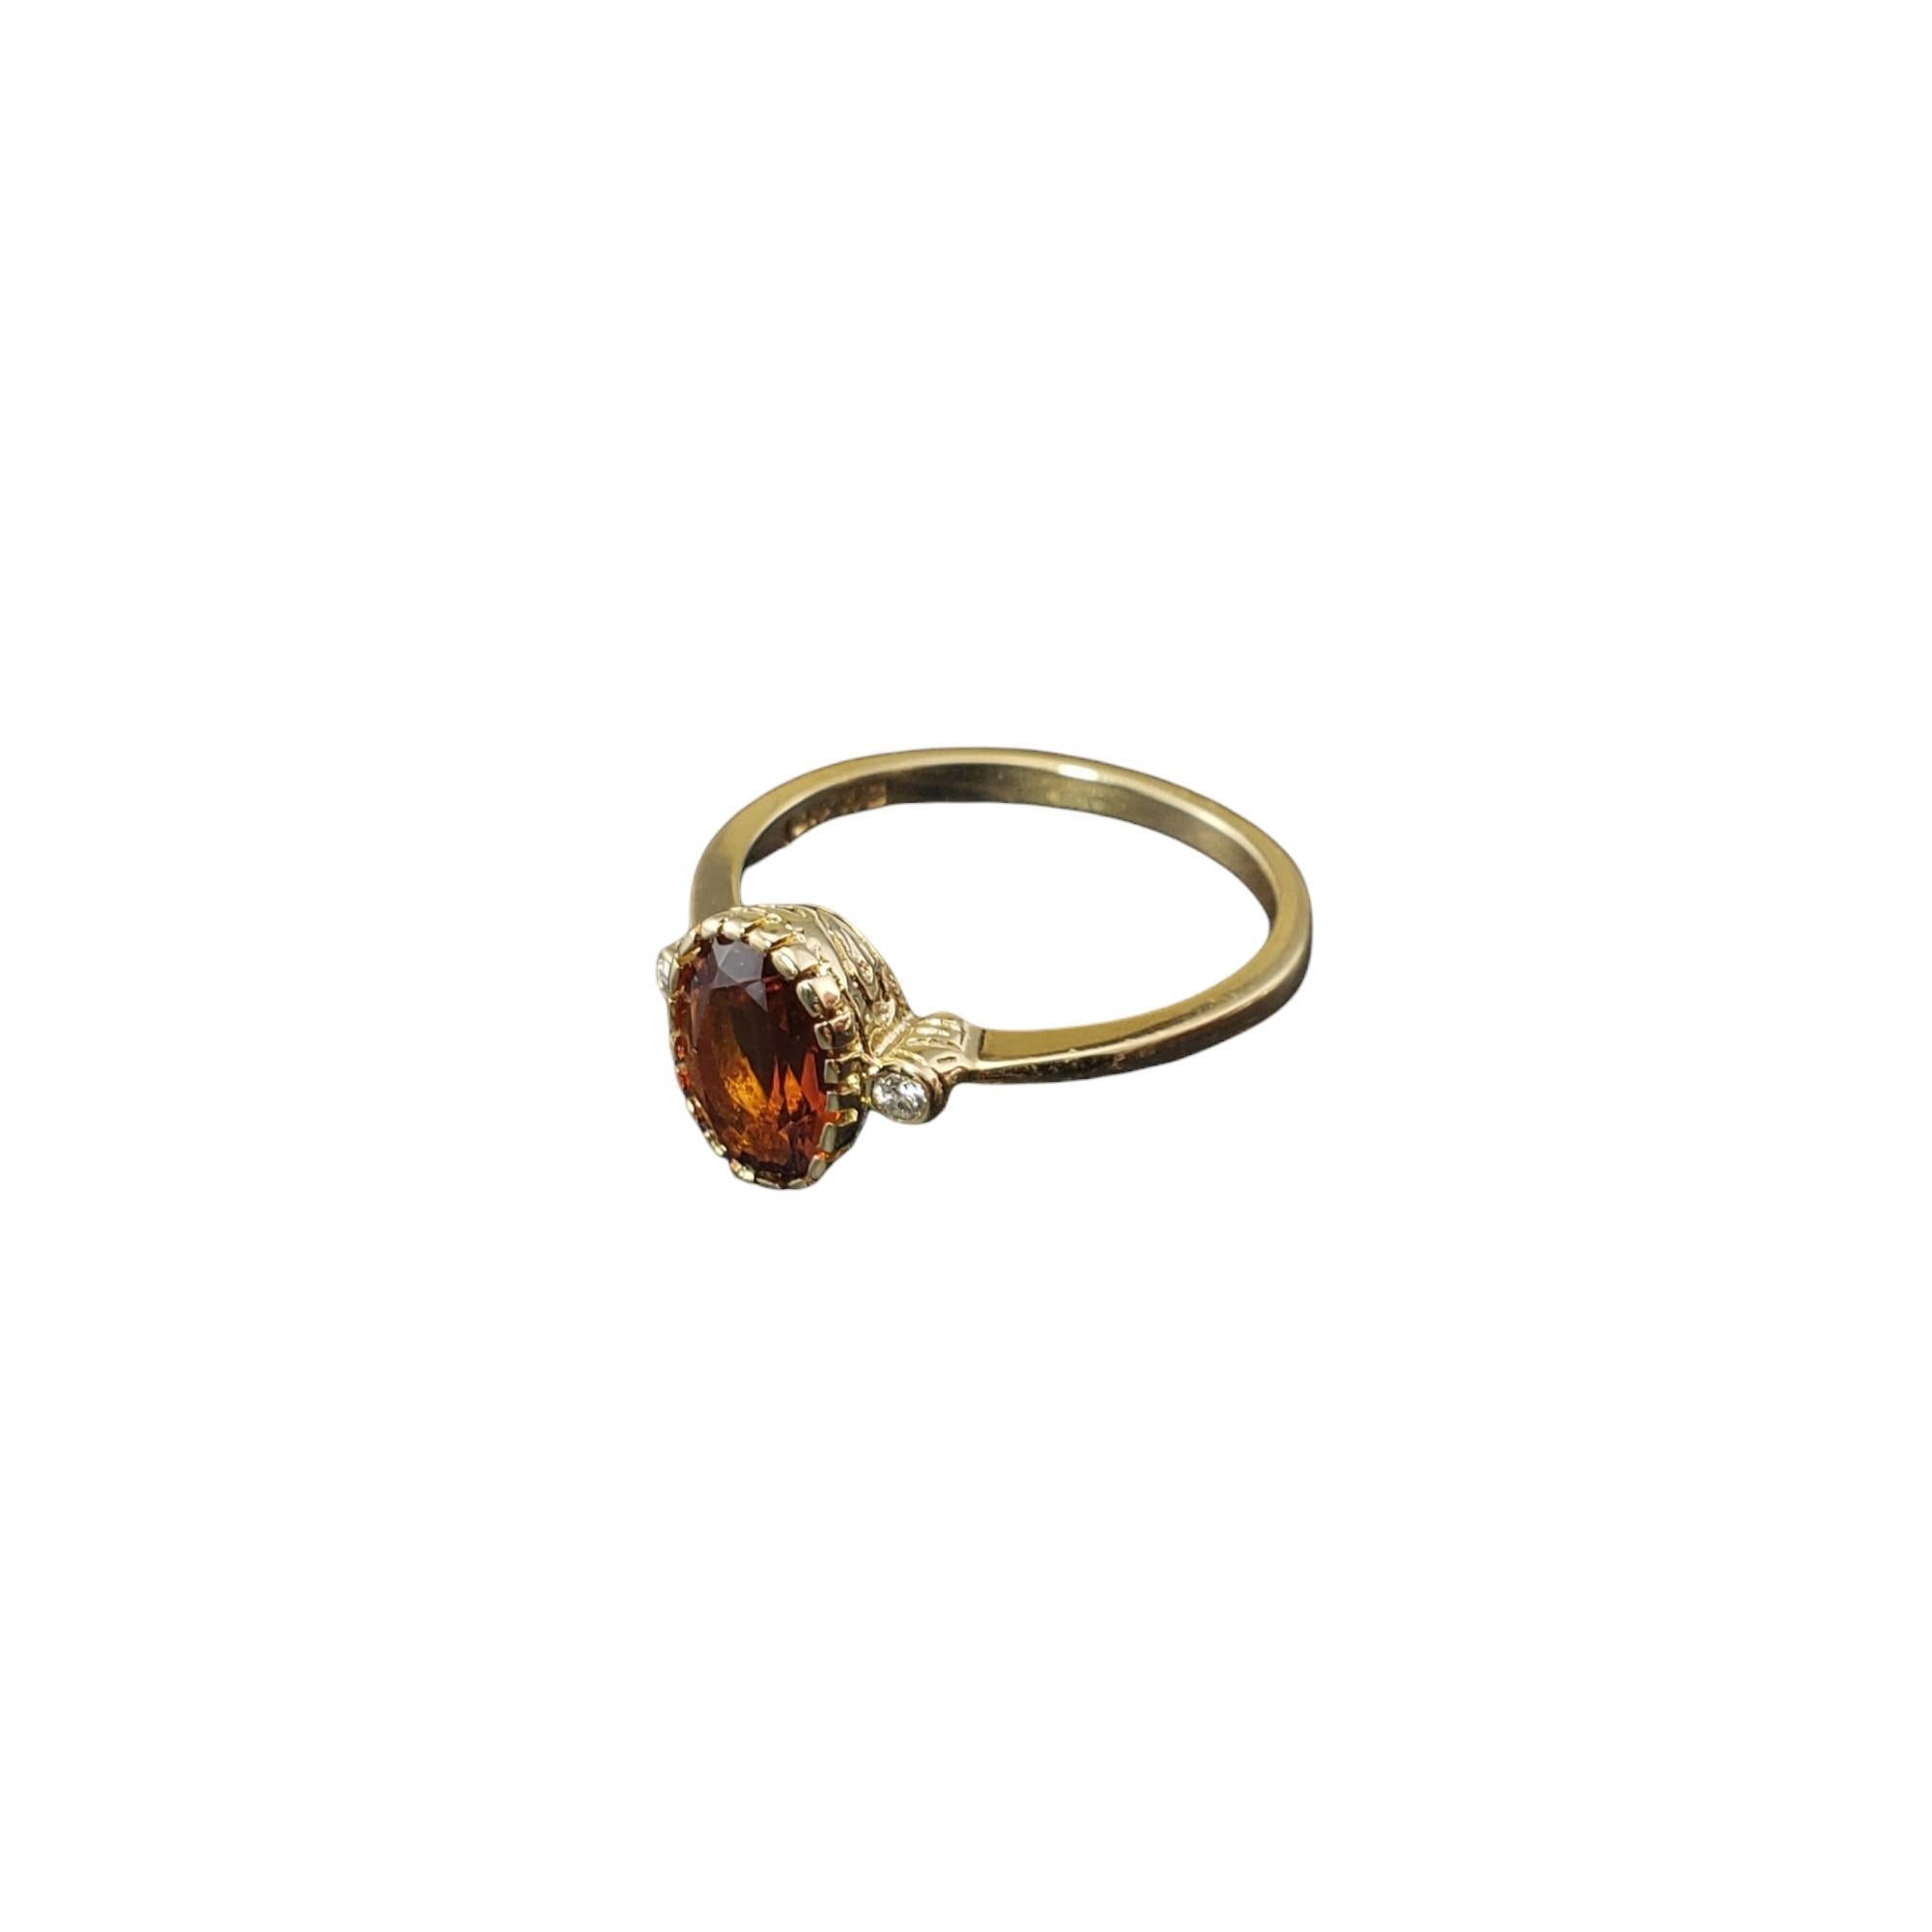 Oval Cut 14 Karat Yellow Gold and Citrine Ring Size 6.25 #17156 For Sale